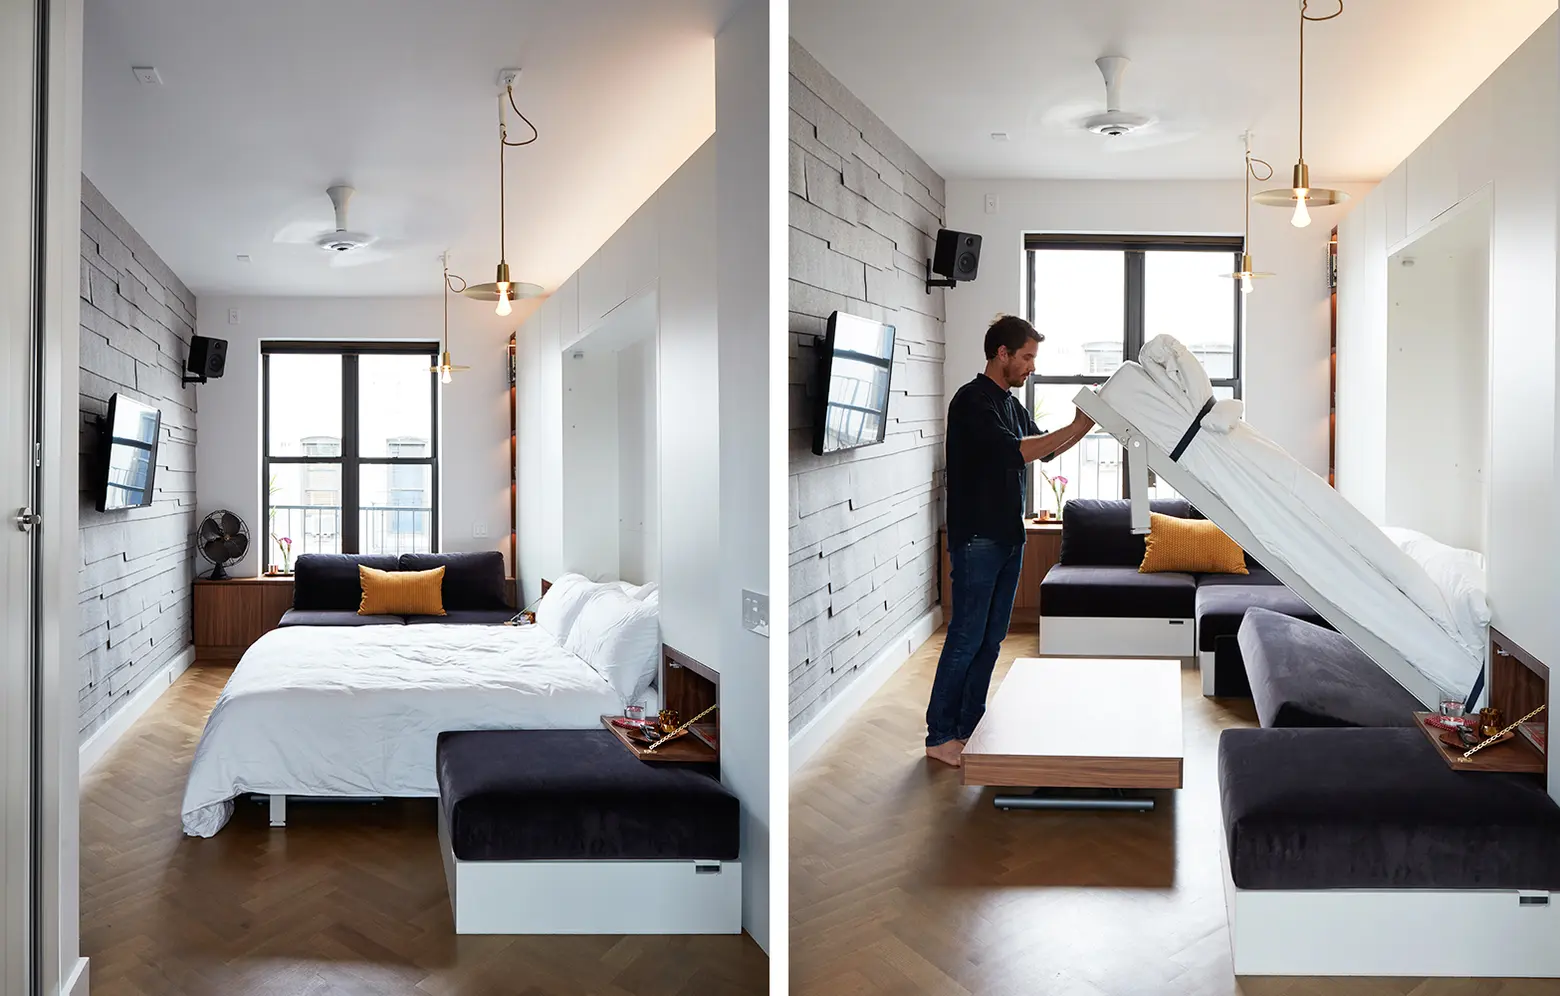 Small living advocate Graham Hill lists his 350-square-foot Soho micro apartment for $750K